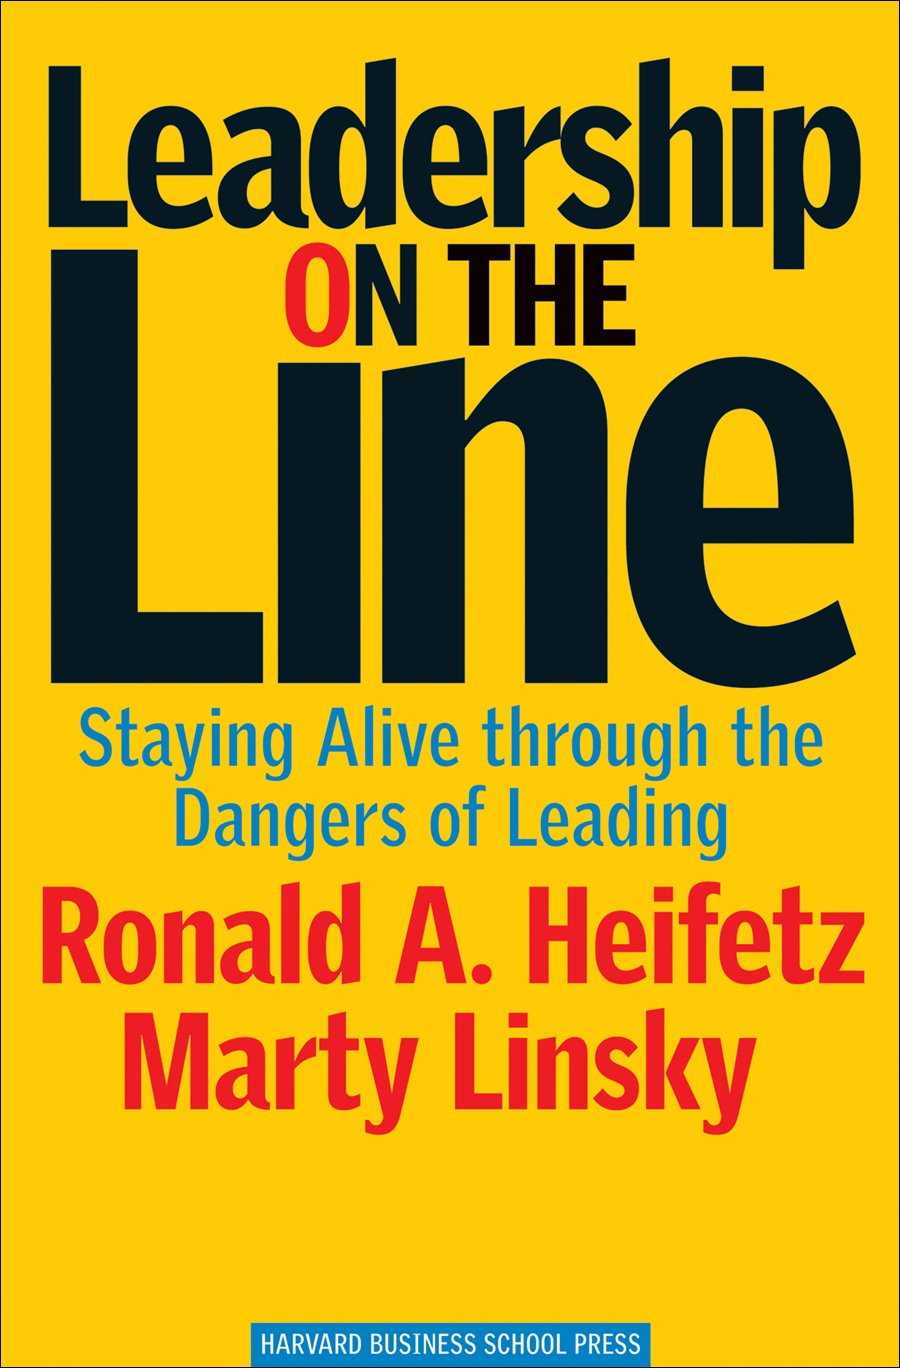 Leadership on the Line: Staying Alive through the Dangers of Leading